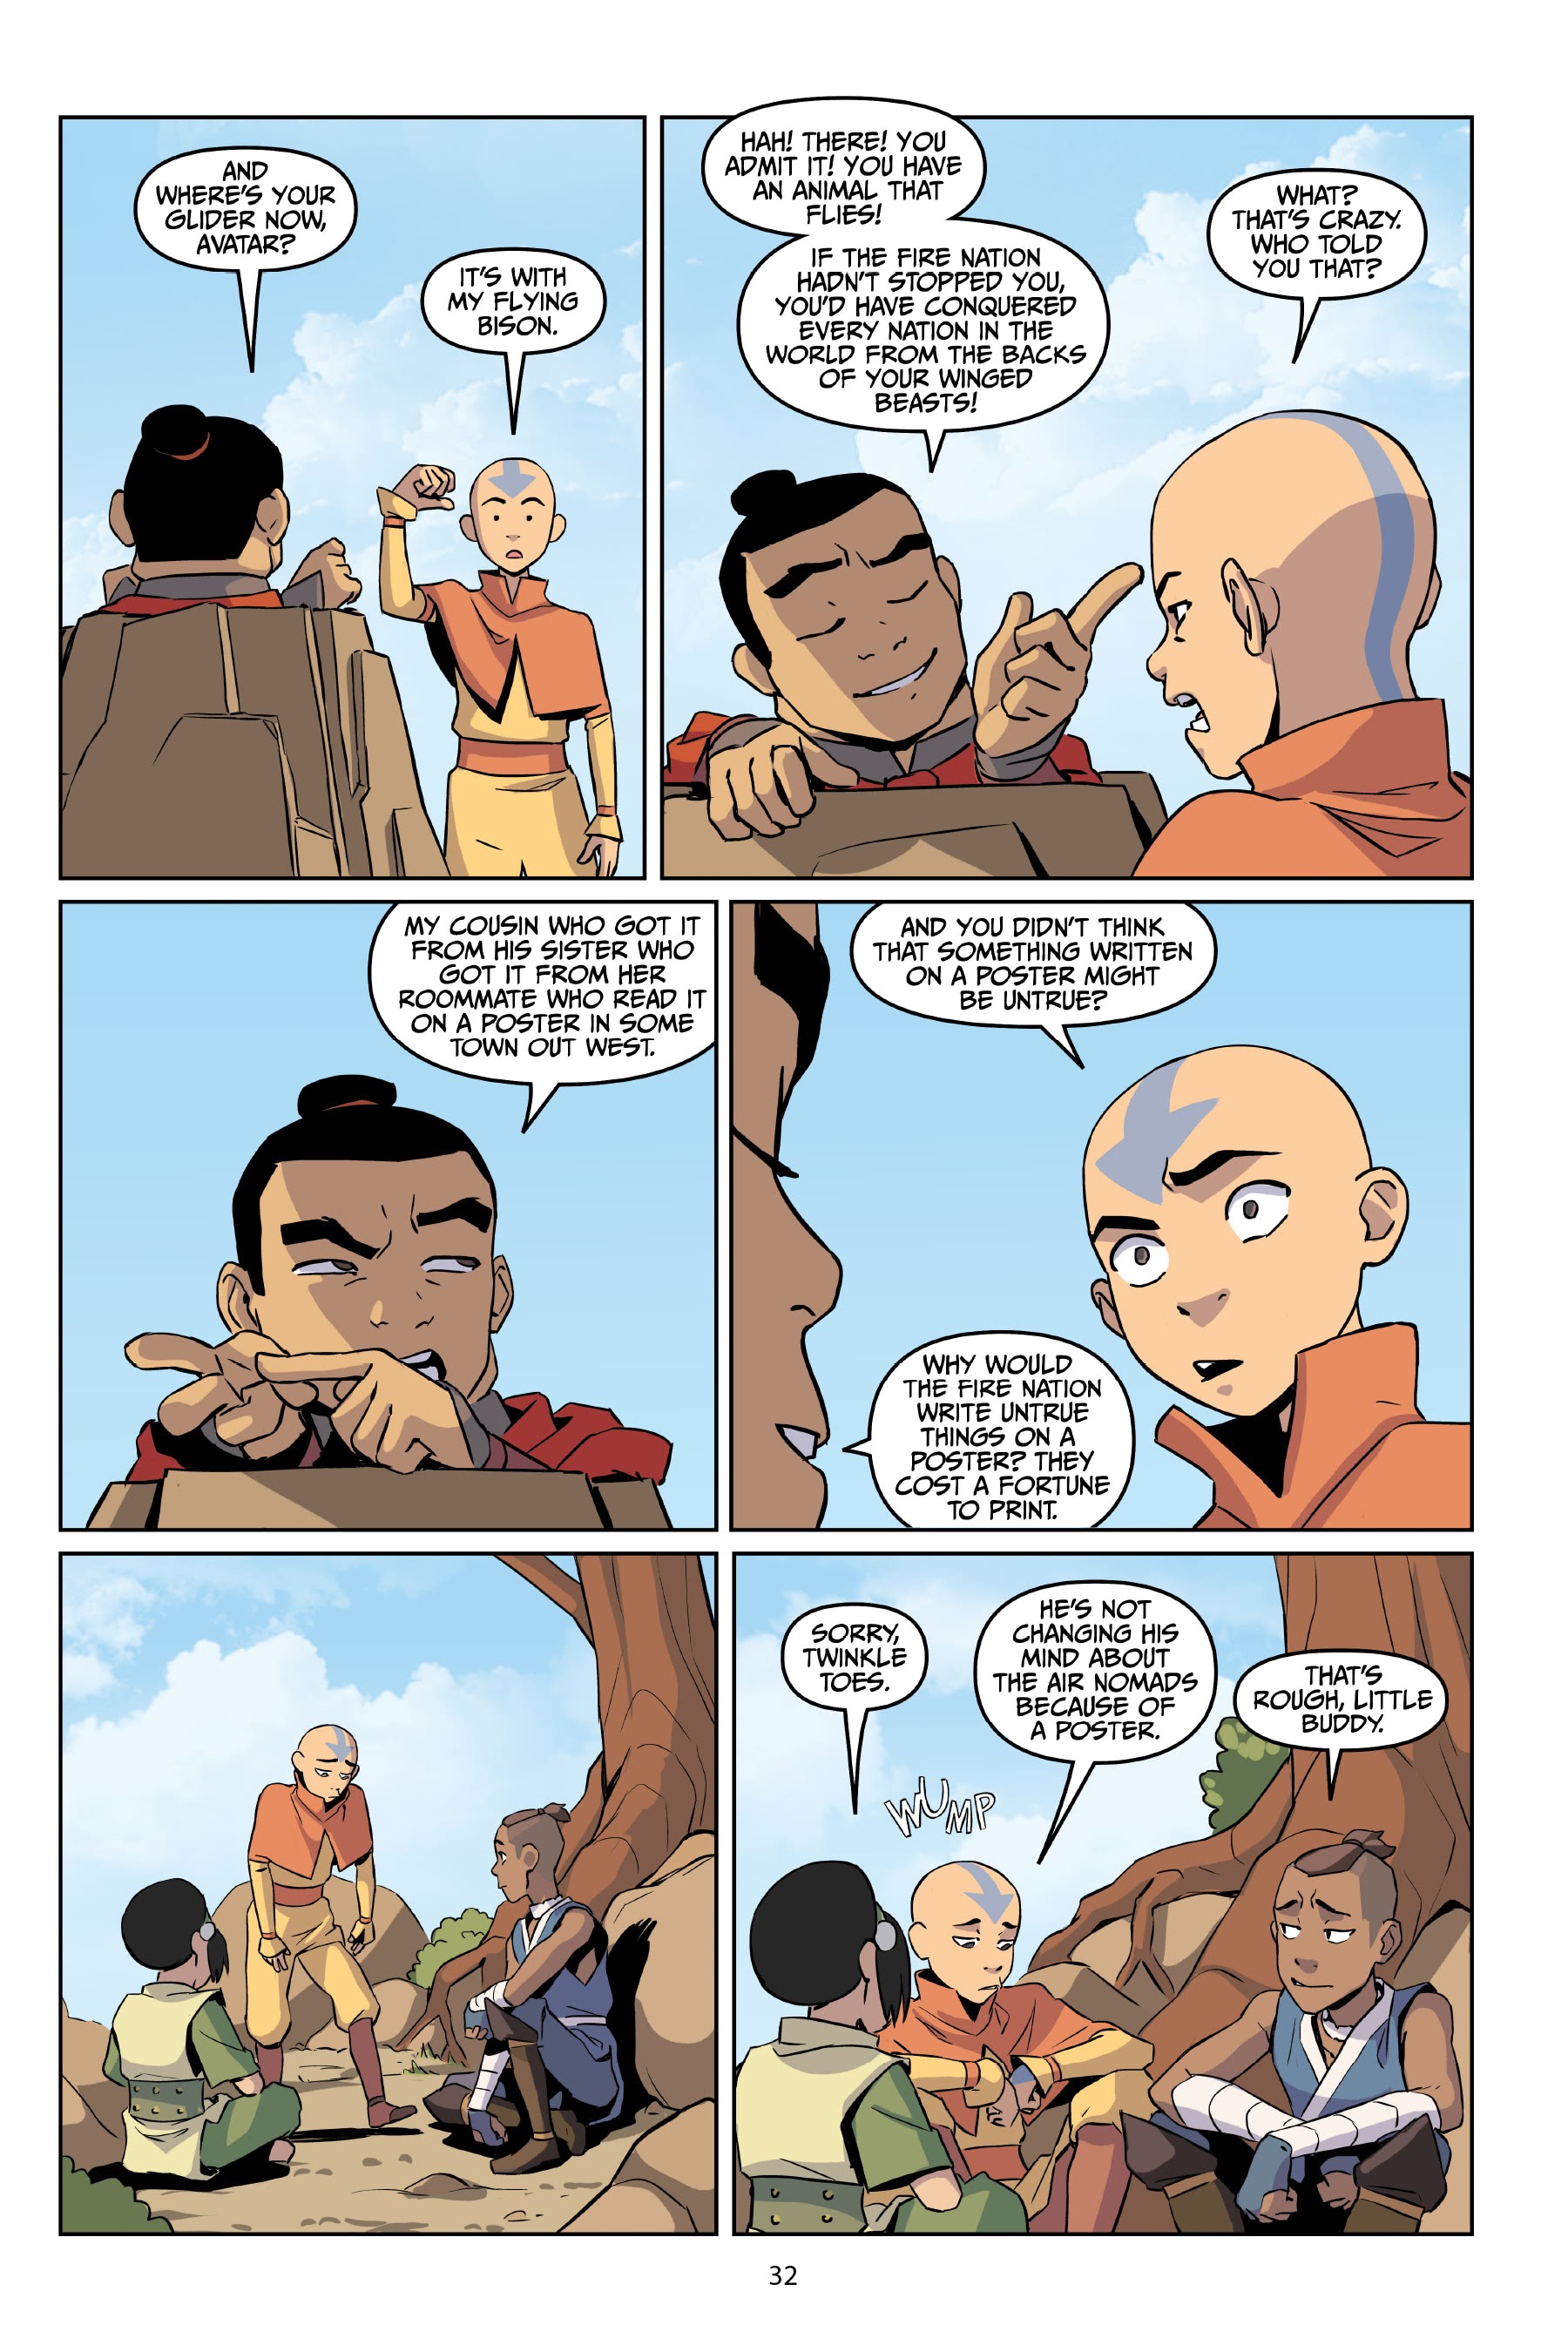 Read online Avatar: The Last Airbender—Katara and the Pirate's Silver comic -  Issue # TPB - 33